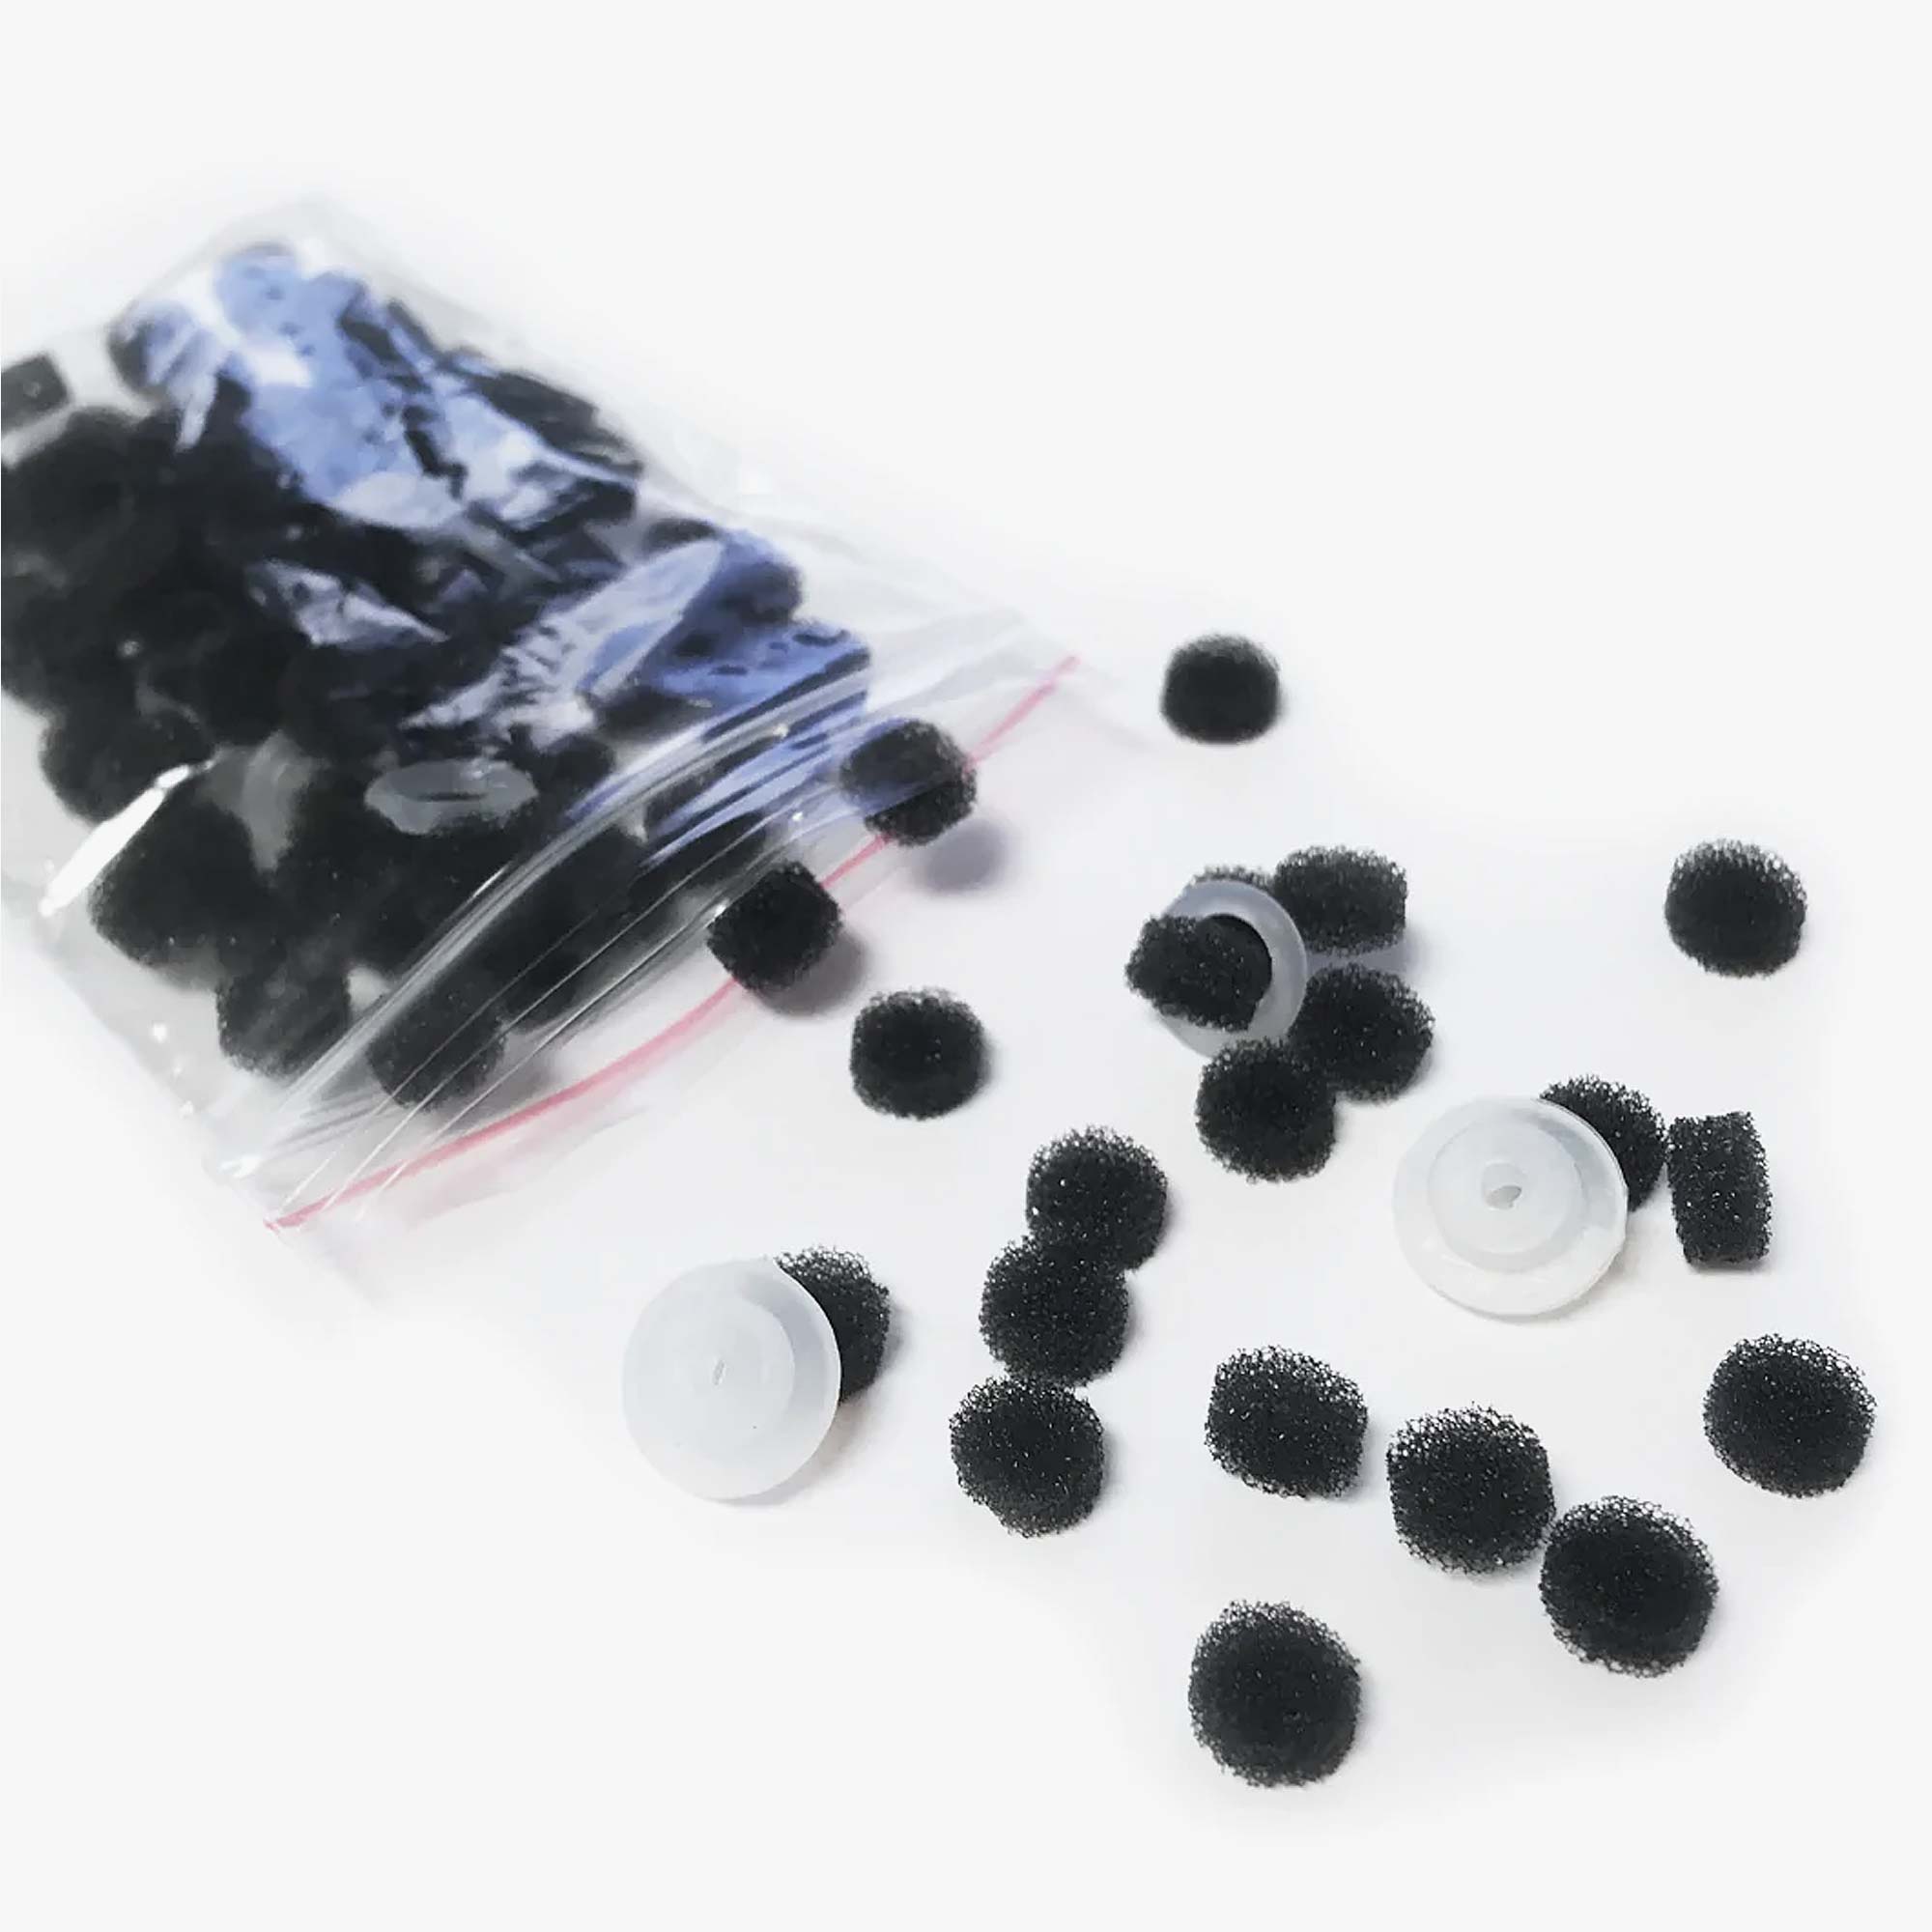 MIO Complete Set of Replacement Filters, Caps and O-rings